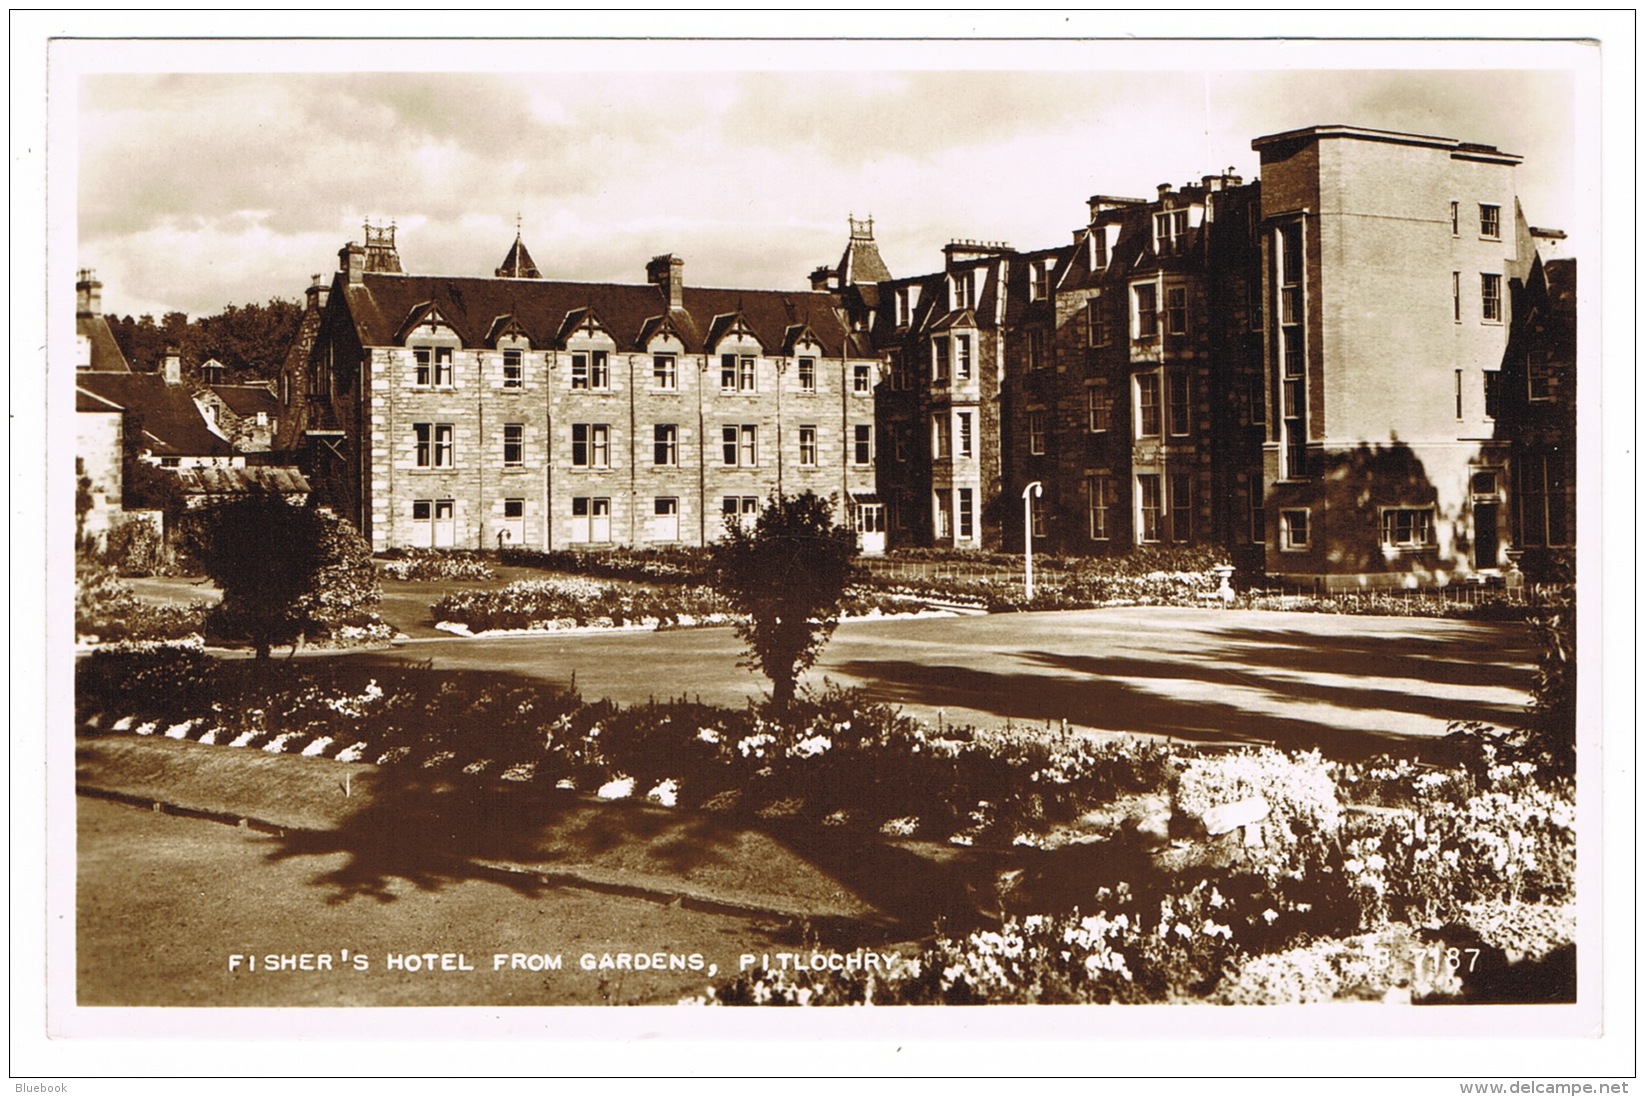 RB 1165 - Real Photo Postcard - Fisher's Hotel From Gardens Pitlochry Perthshire Scotland - Perthshire